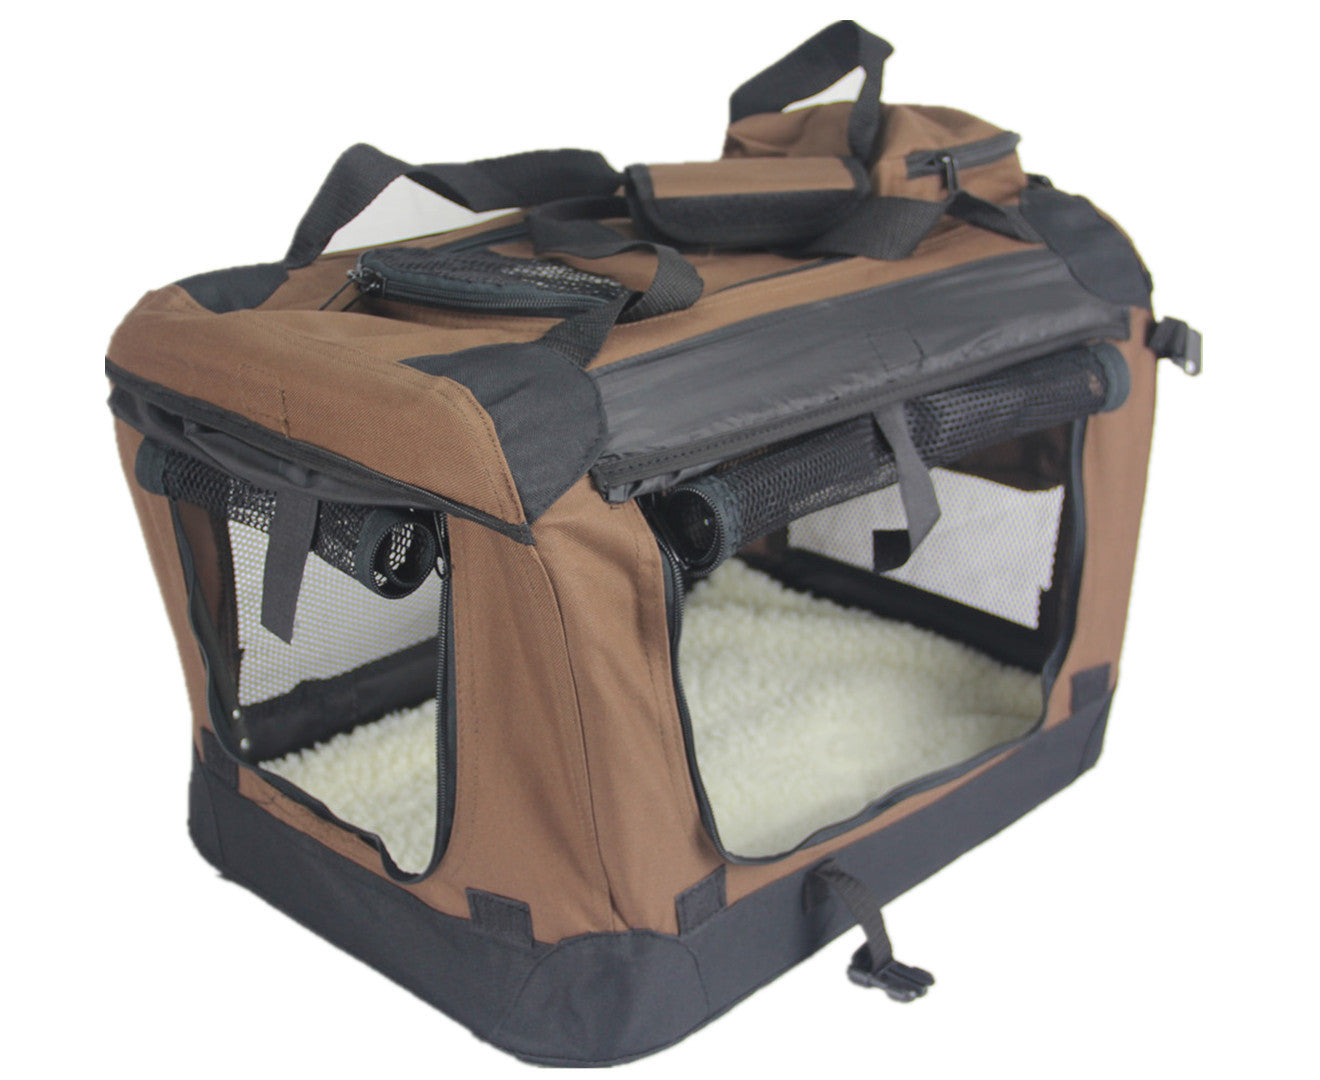 Large Fordable Pet Dog Puppy Soft Crate With Curtain-Brown